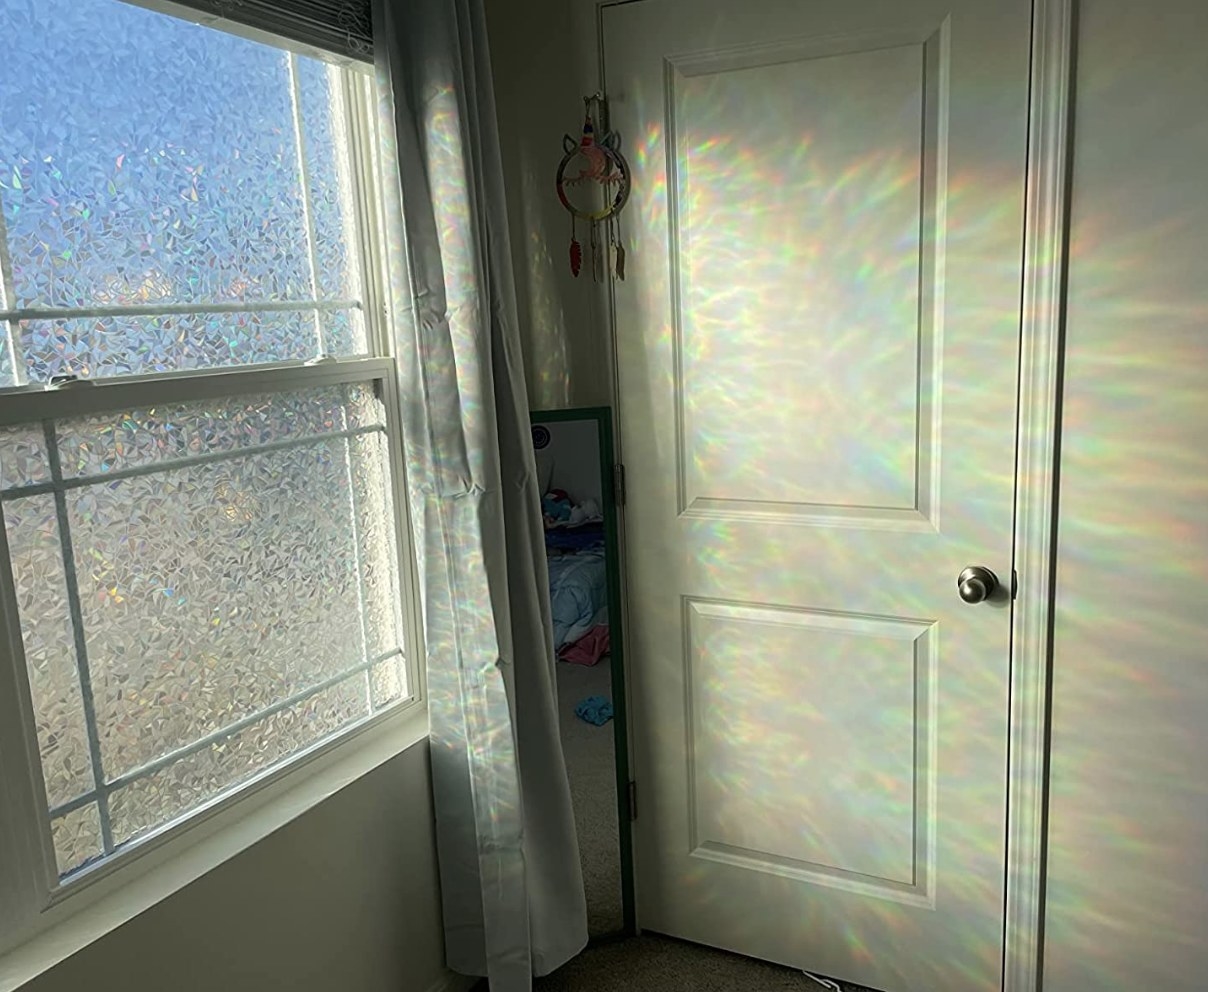 A photo of the product on a window creating rainbows